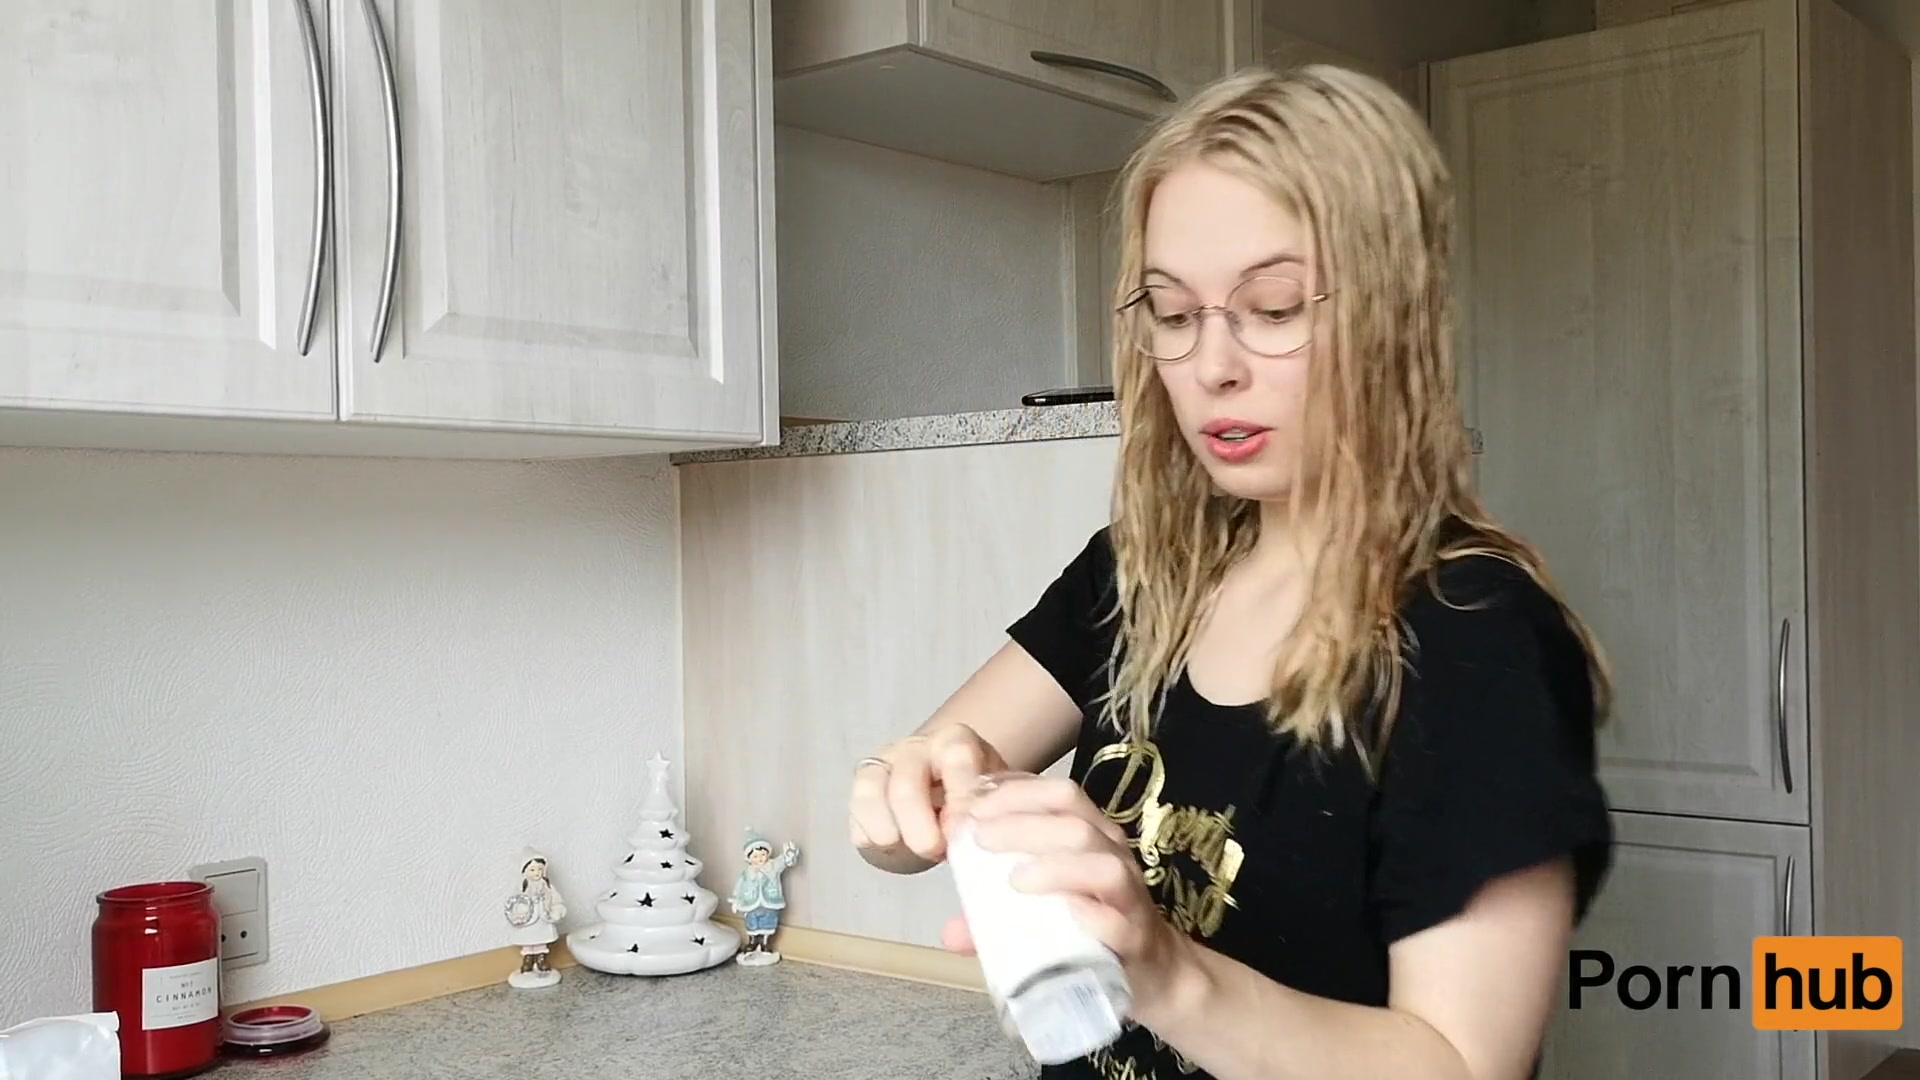 Miss Jenni P - Girl Bakes Cake With Pee And Eats It